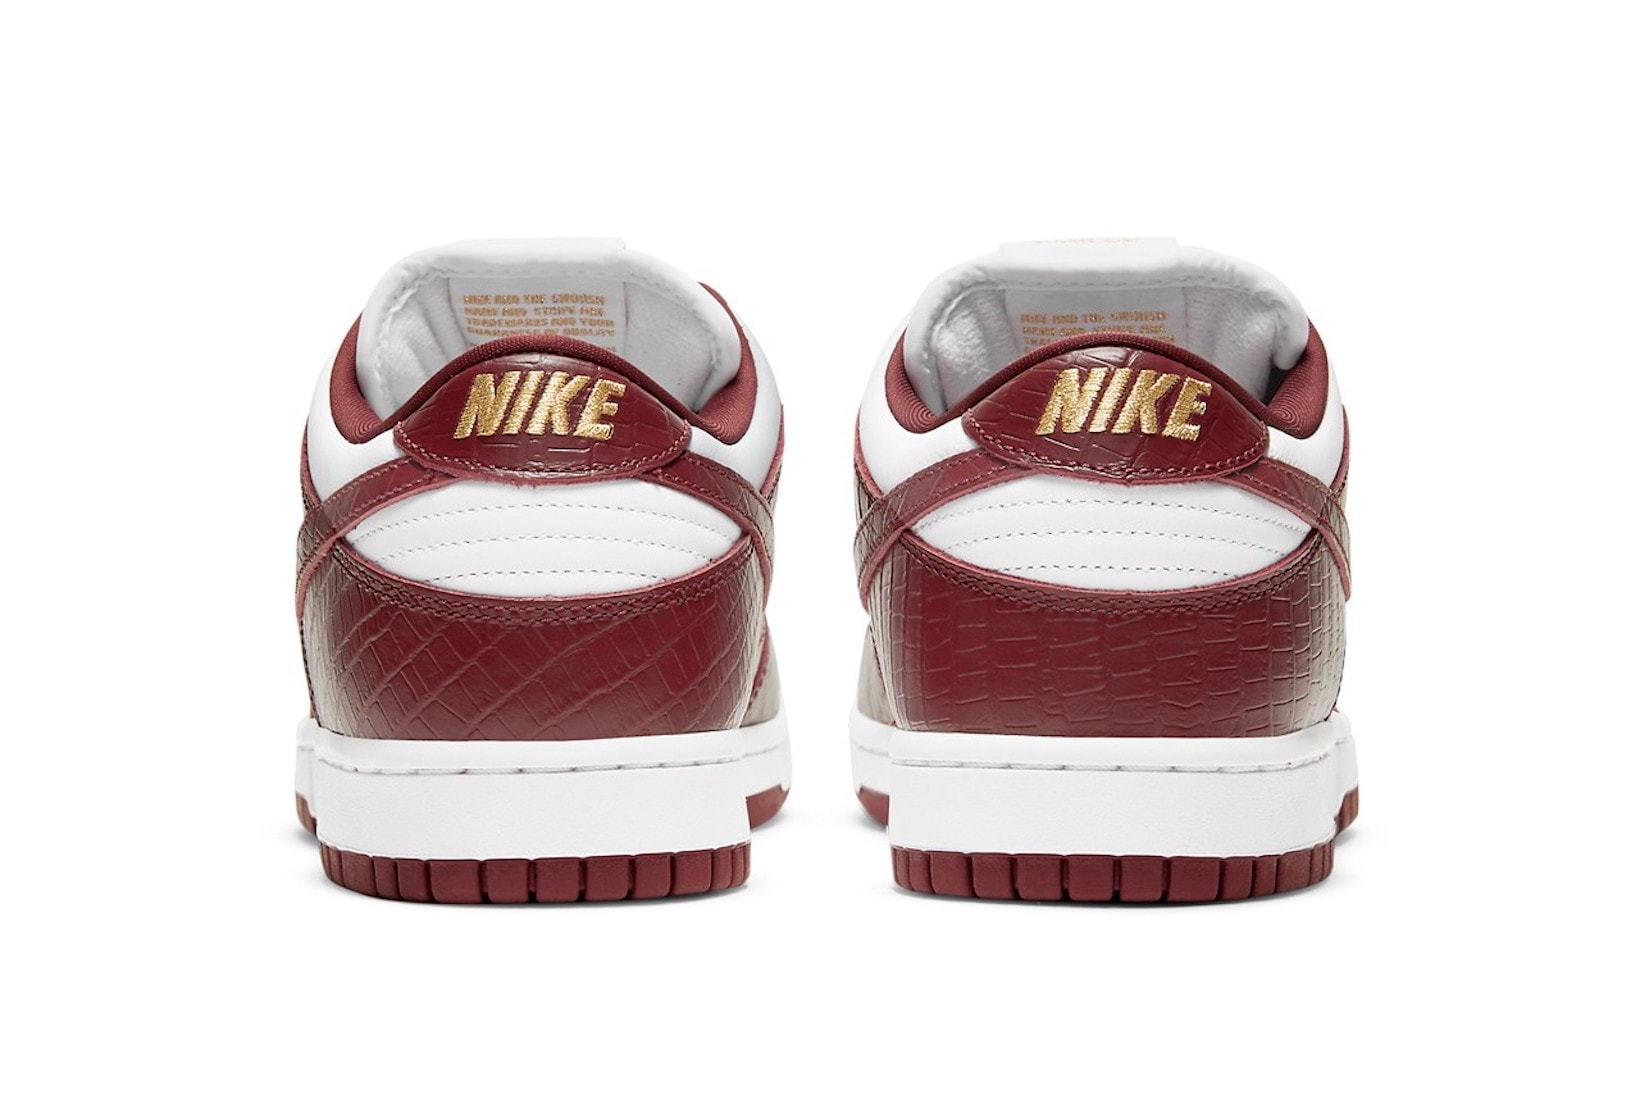 supreme nike sb dunk low collaboration sneakers barkroot brown burgundy red white gold heel